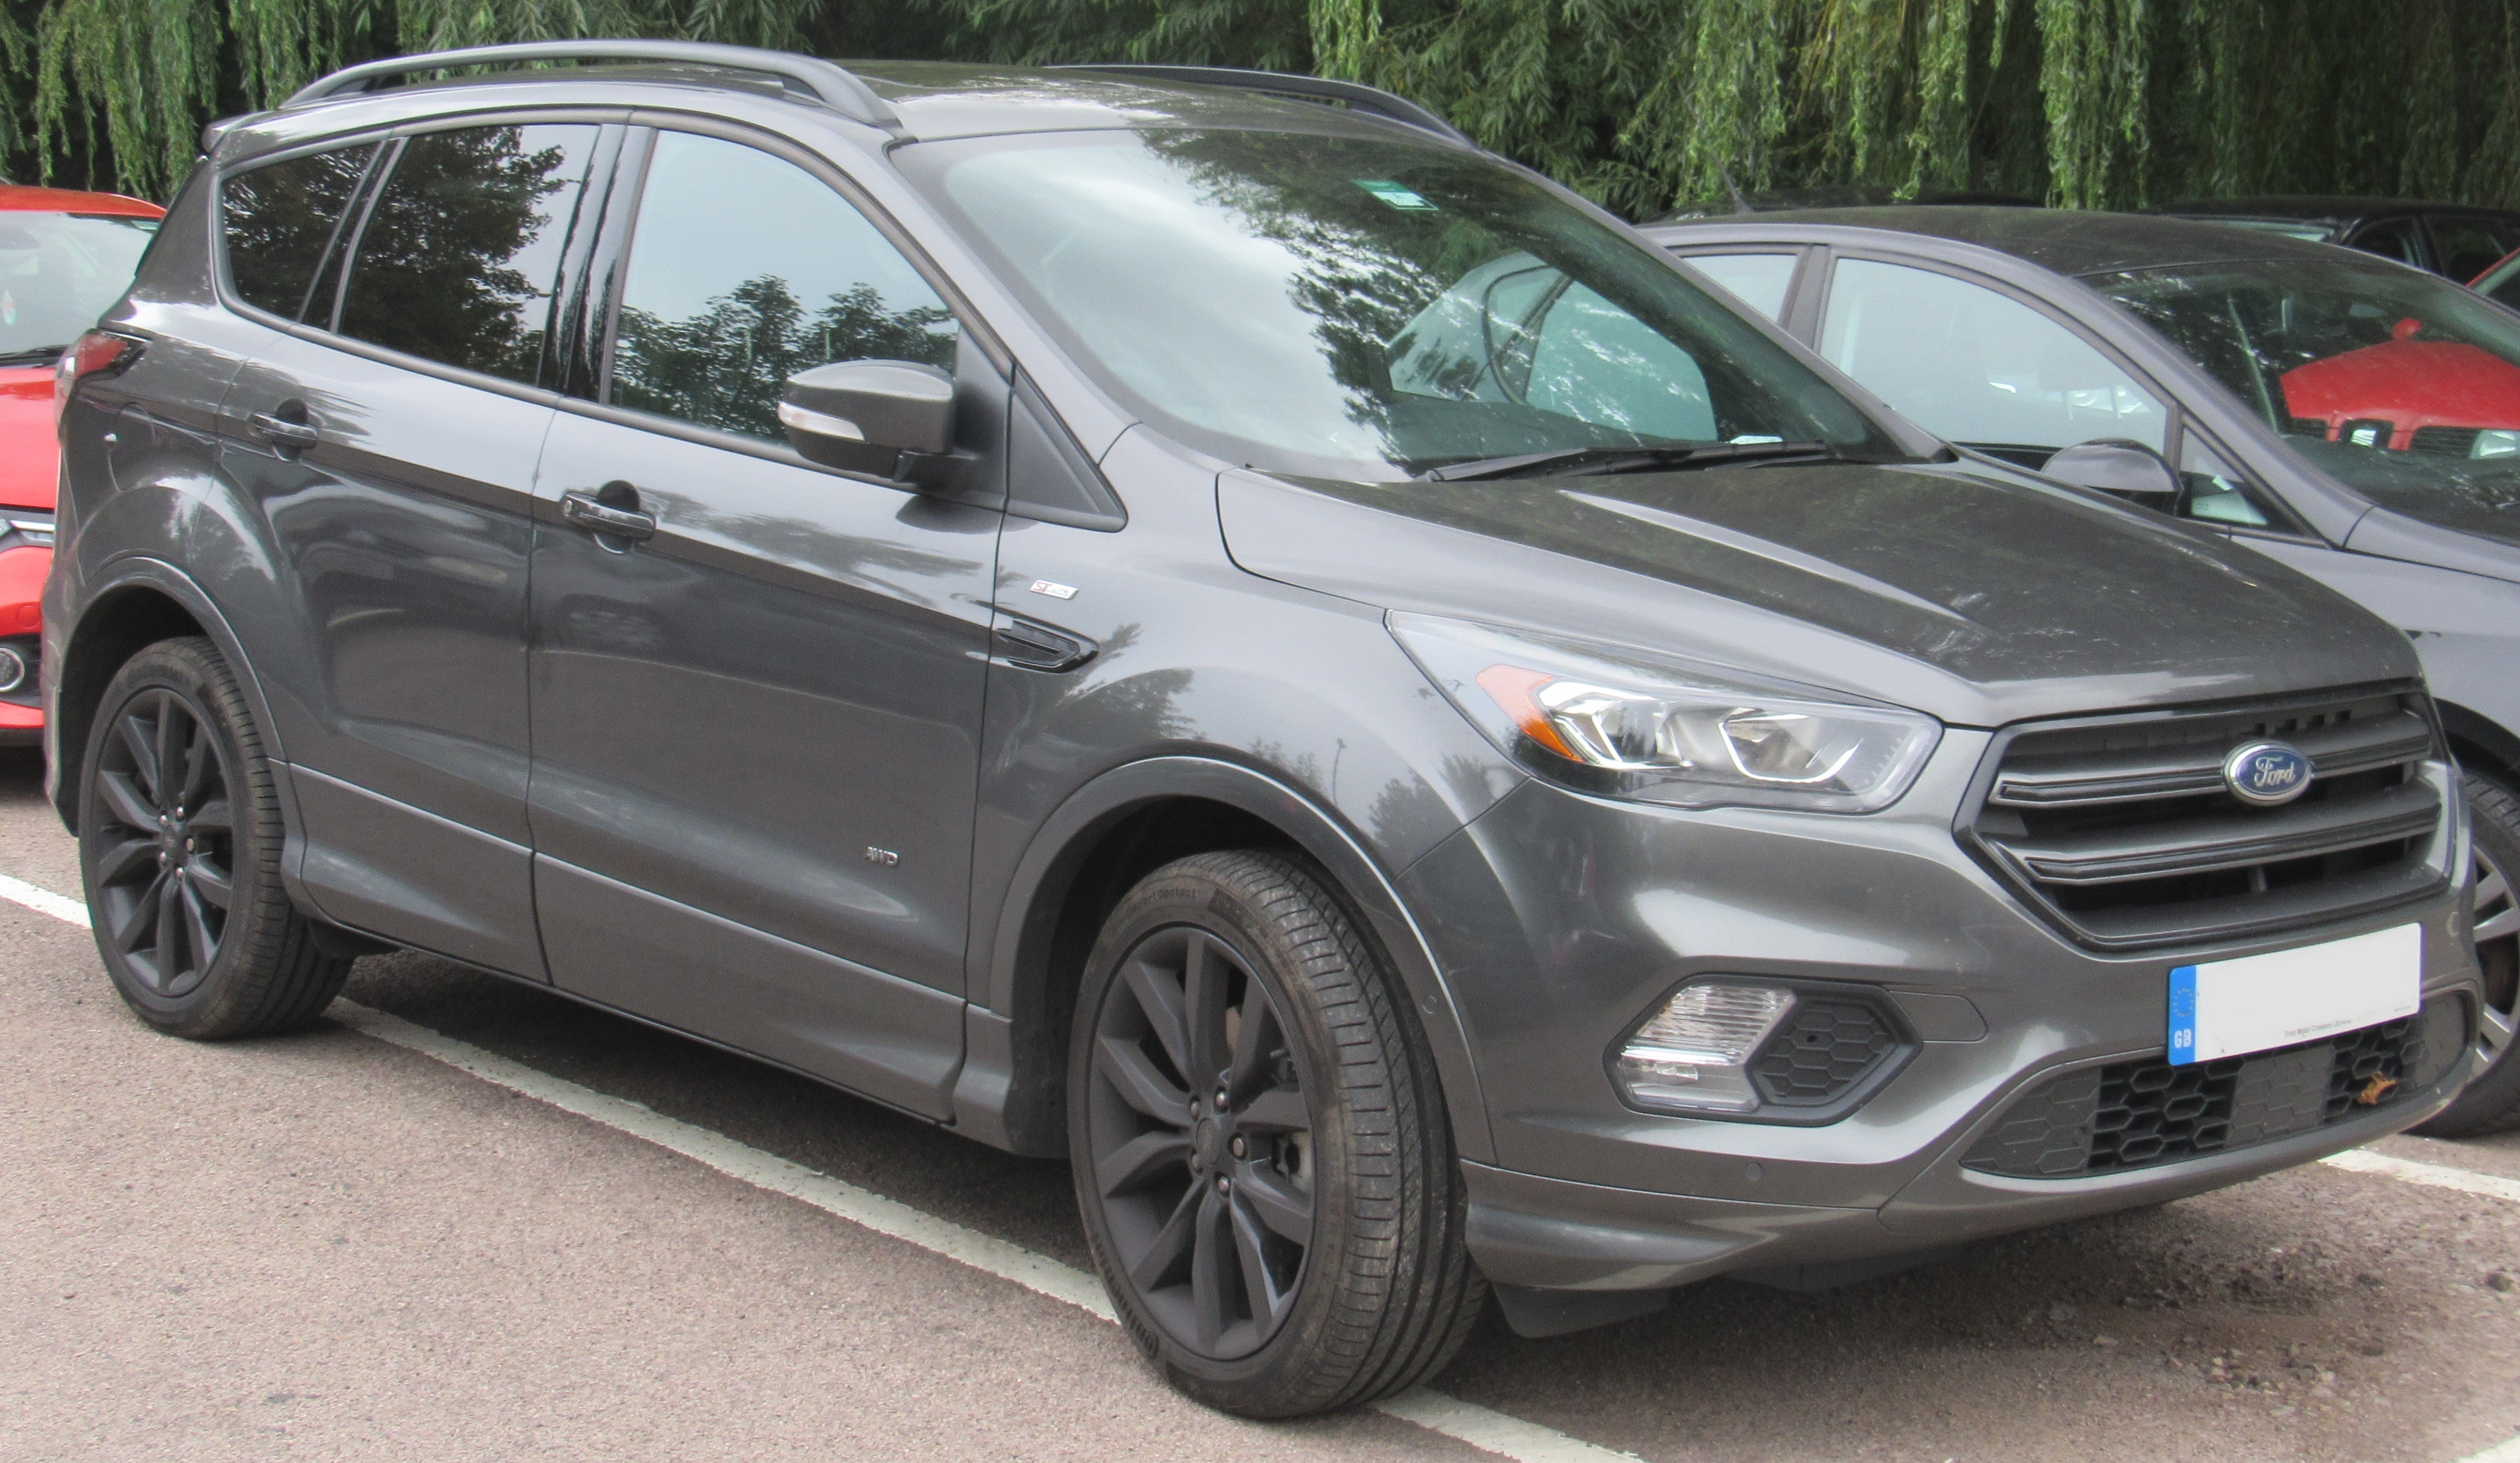 Ford Kuga exterior specifications